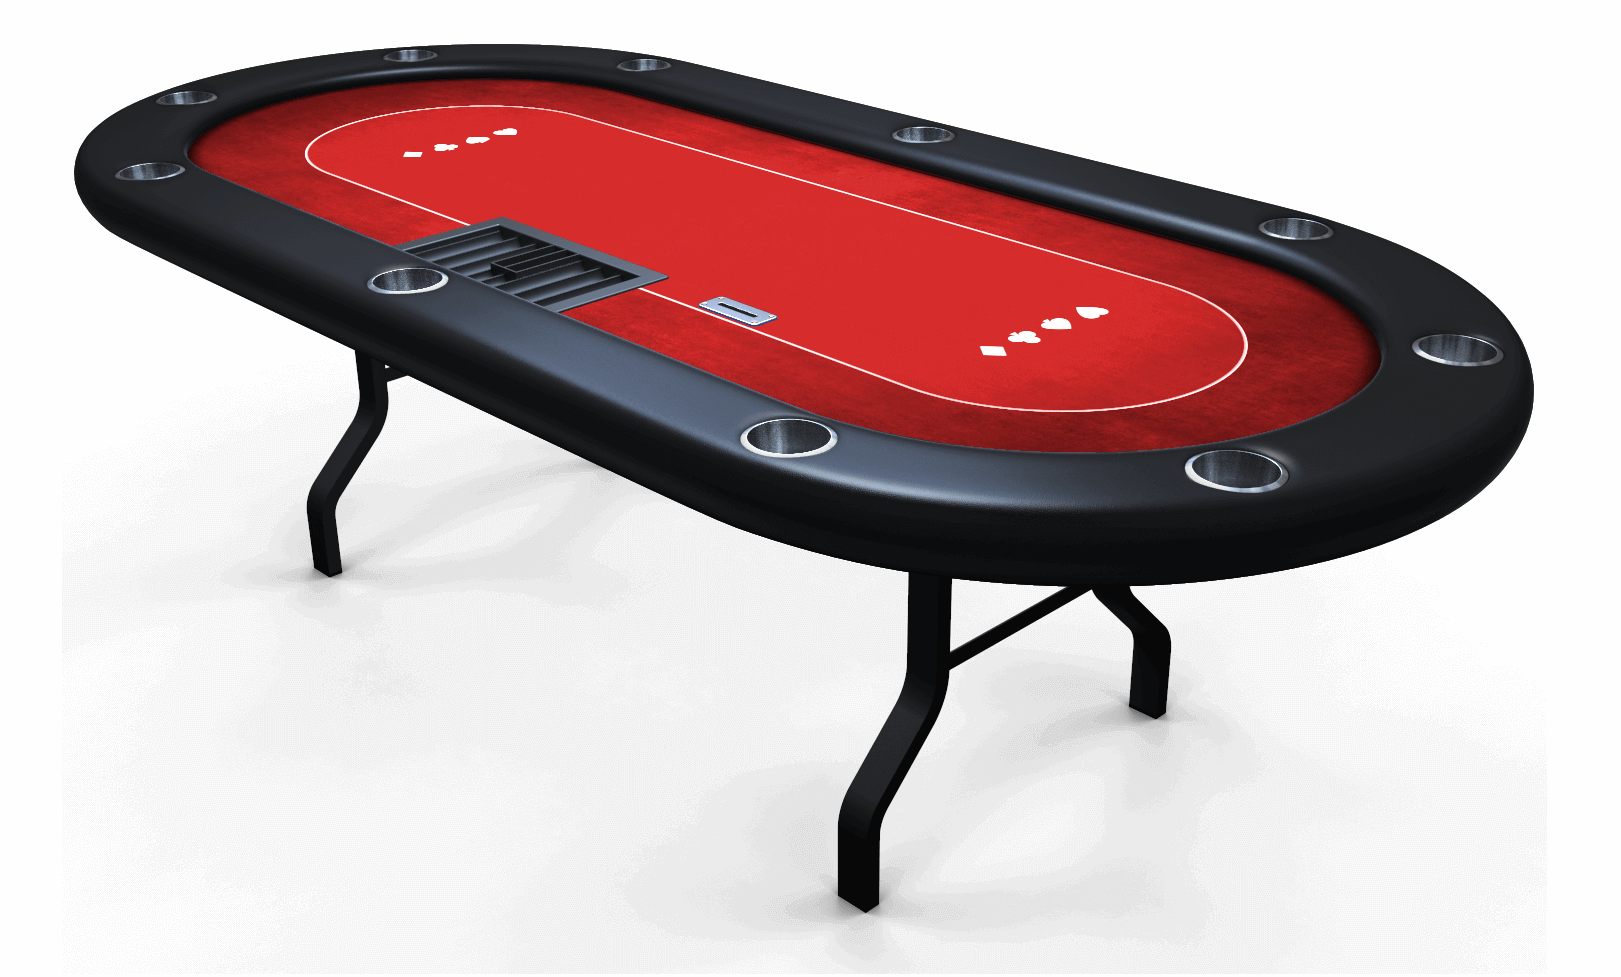  GSE Two-Tone Poker Table Suited Speed Cloth. Casino